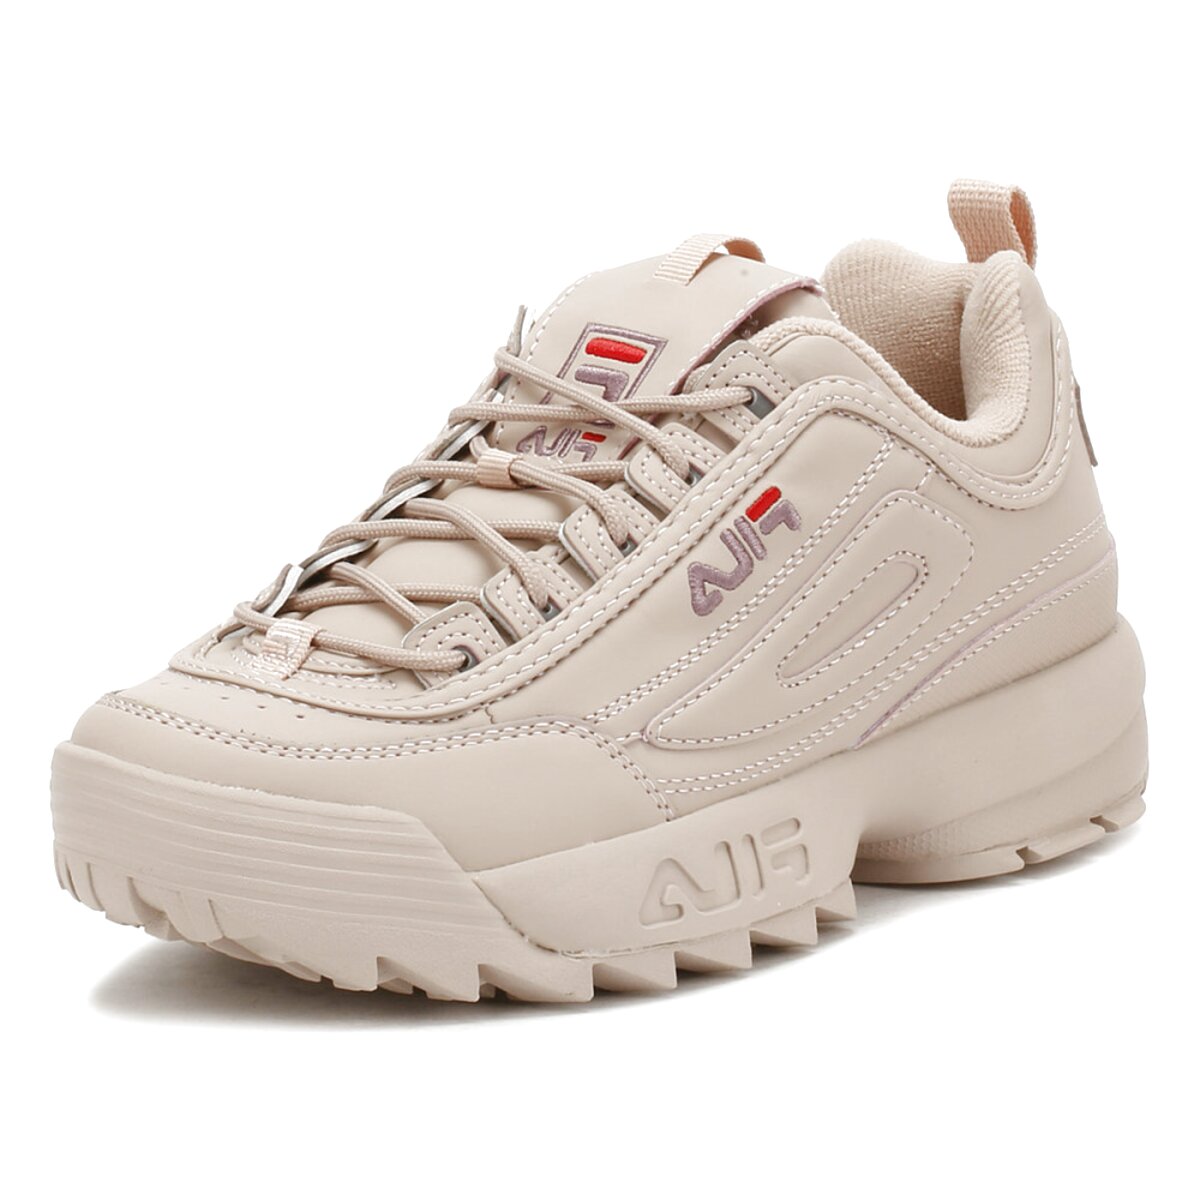 Womens Fila Trainers for sale in UK | View 72 bargains